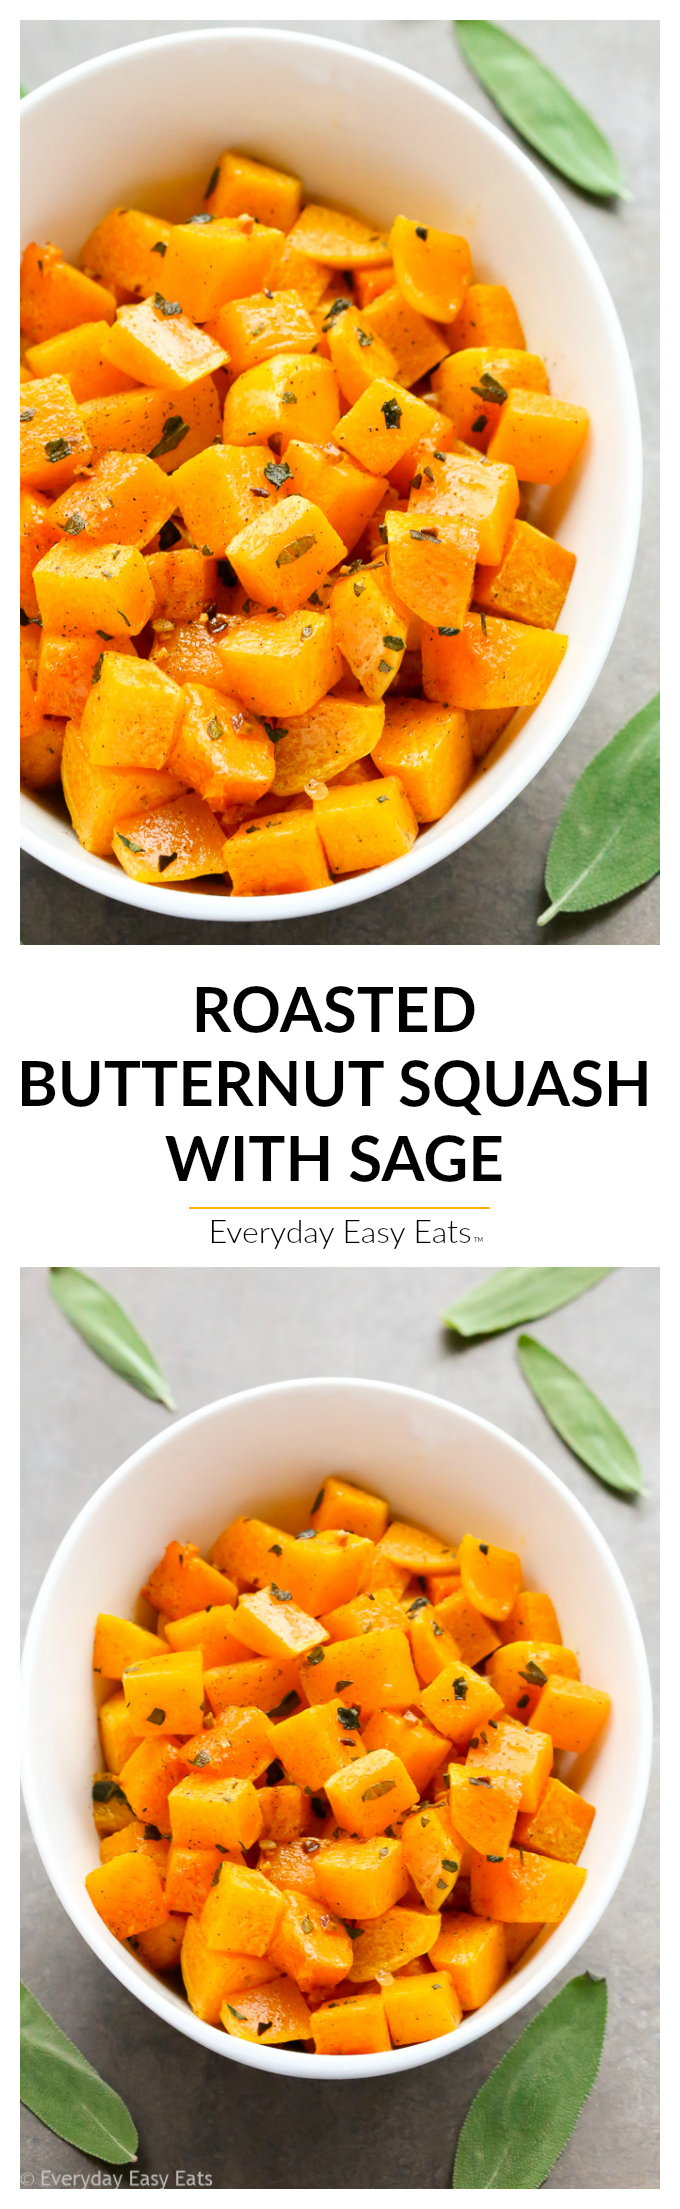 Roasted Butternut Squash with Sage - Cubes of butternut squash roasted to perfection with olive oil, fresh sage and garlic. A healthy and delicious fall side that is naturally paleo and vegan. | EverydayEasyEats.com